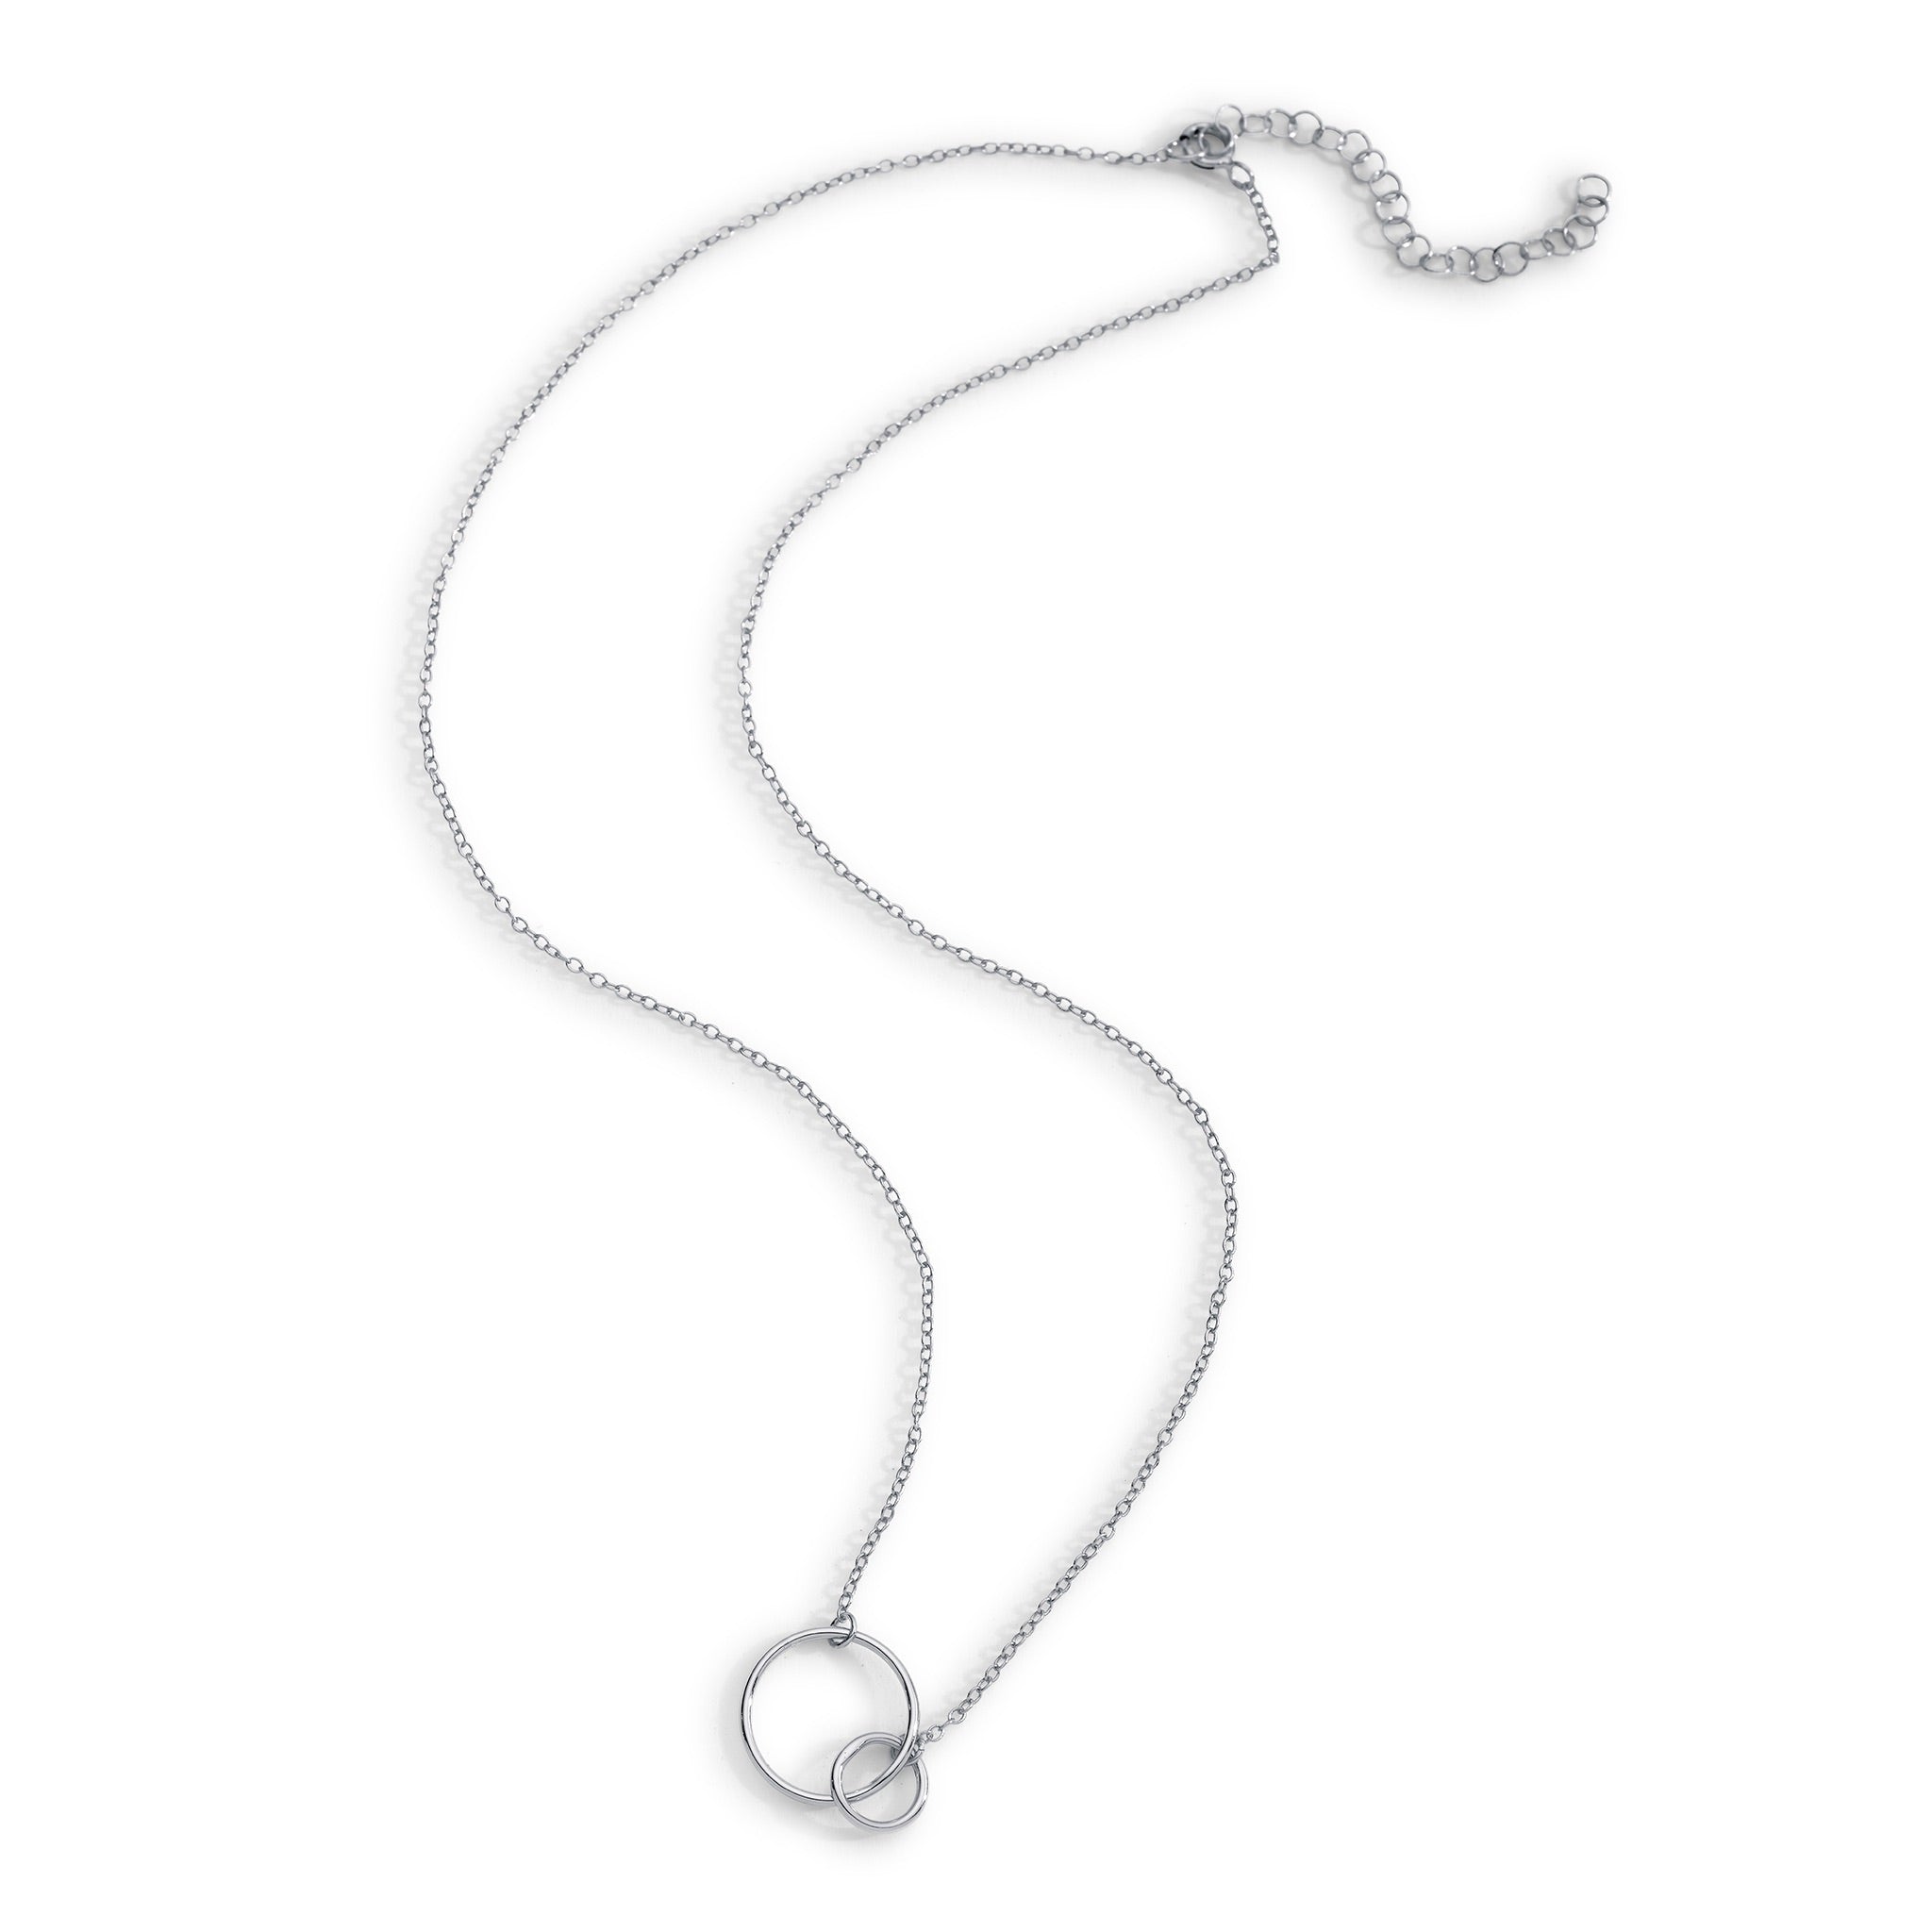 THE MAKERY STERLING SILVER 2 INTERLOCKING RINGS NECKLACE